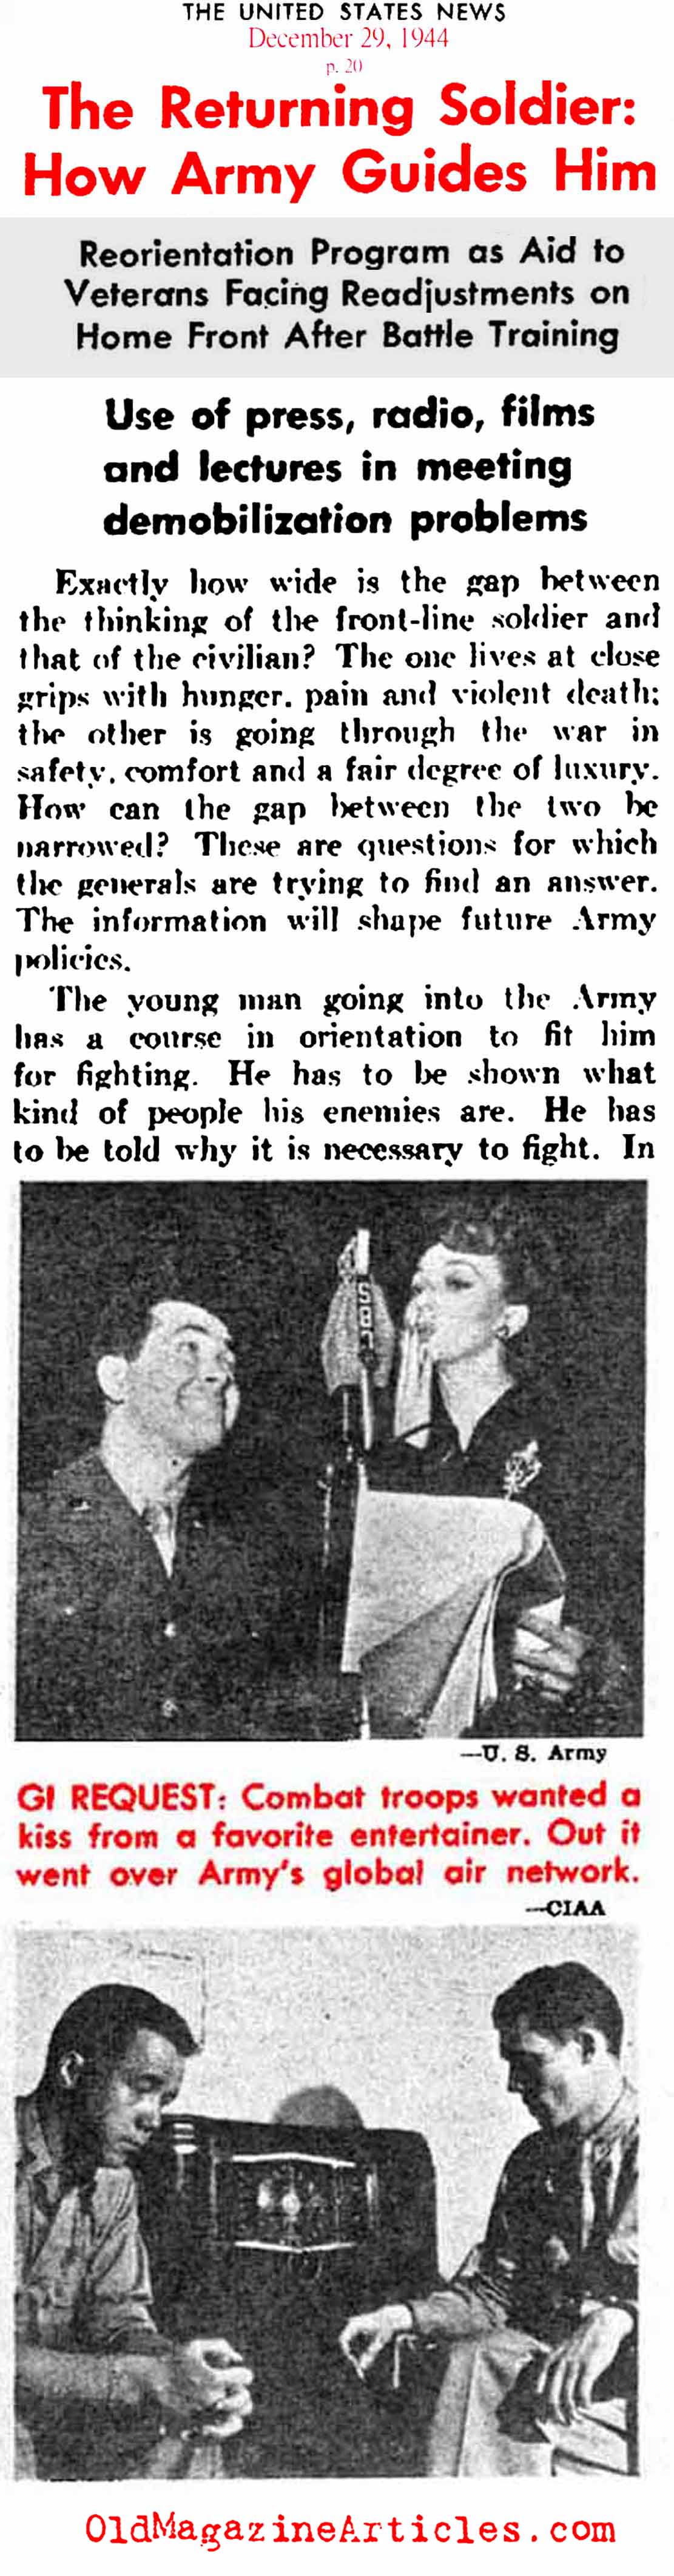 The Returning Army (United States News, 1944)